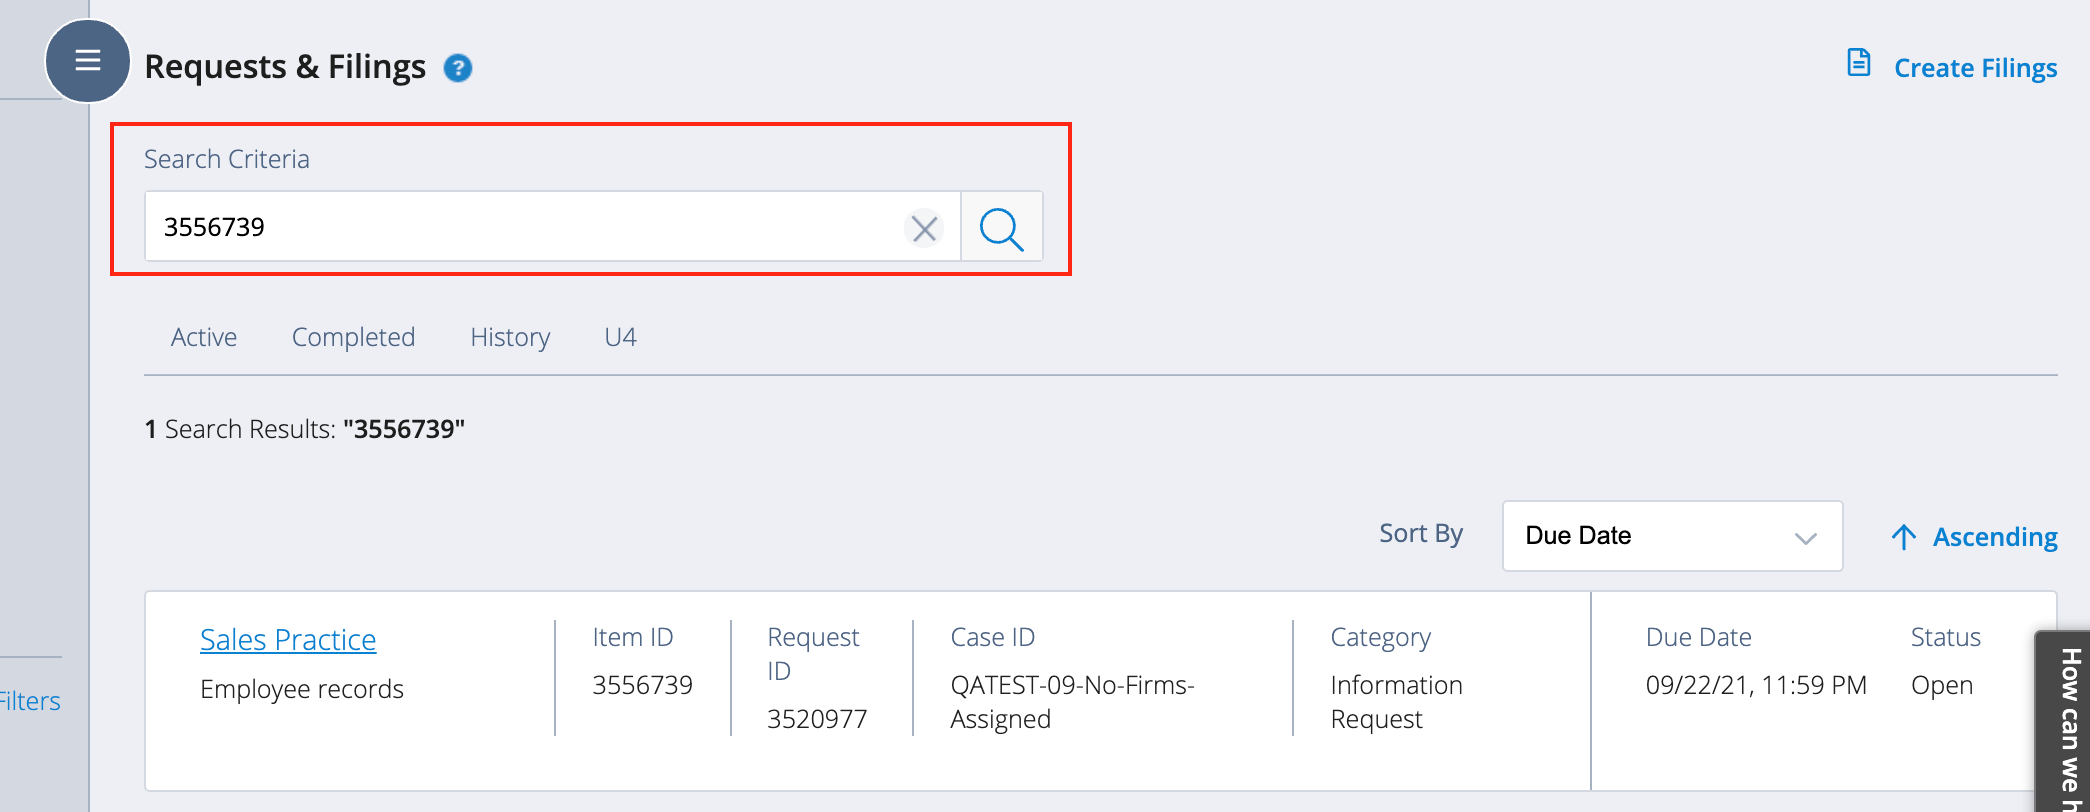 Request Manager - Requests and Filings Search